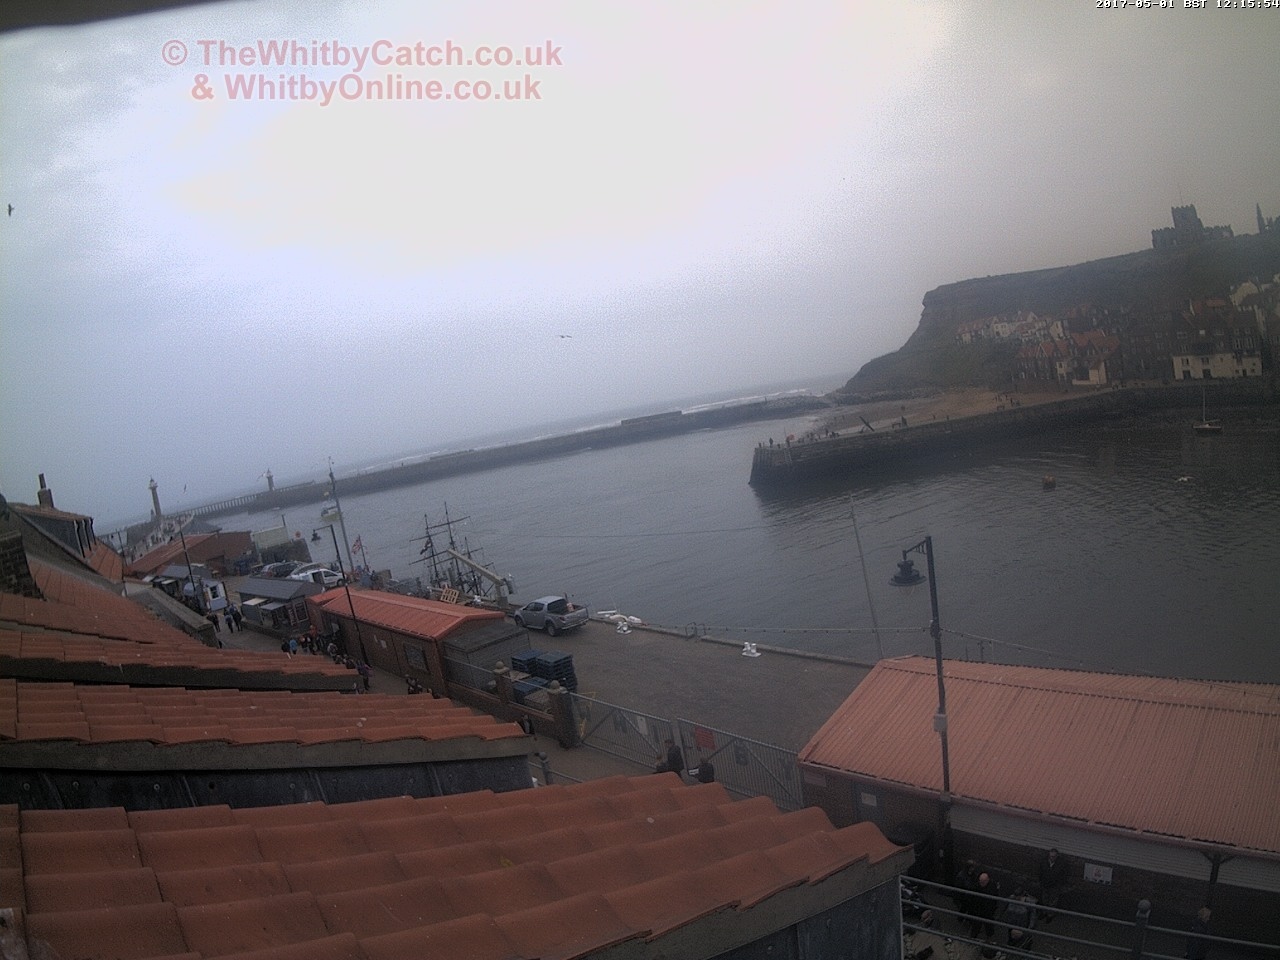 Whitby Mon 1st May 2017 12:16.